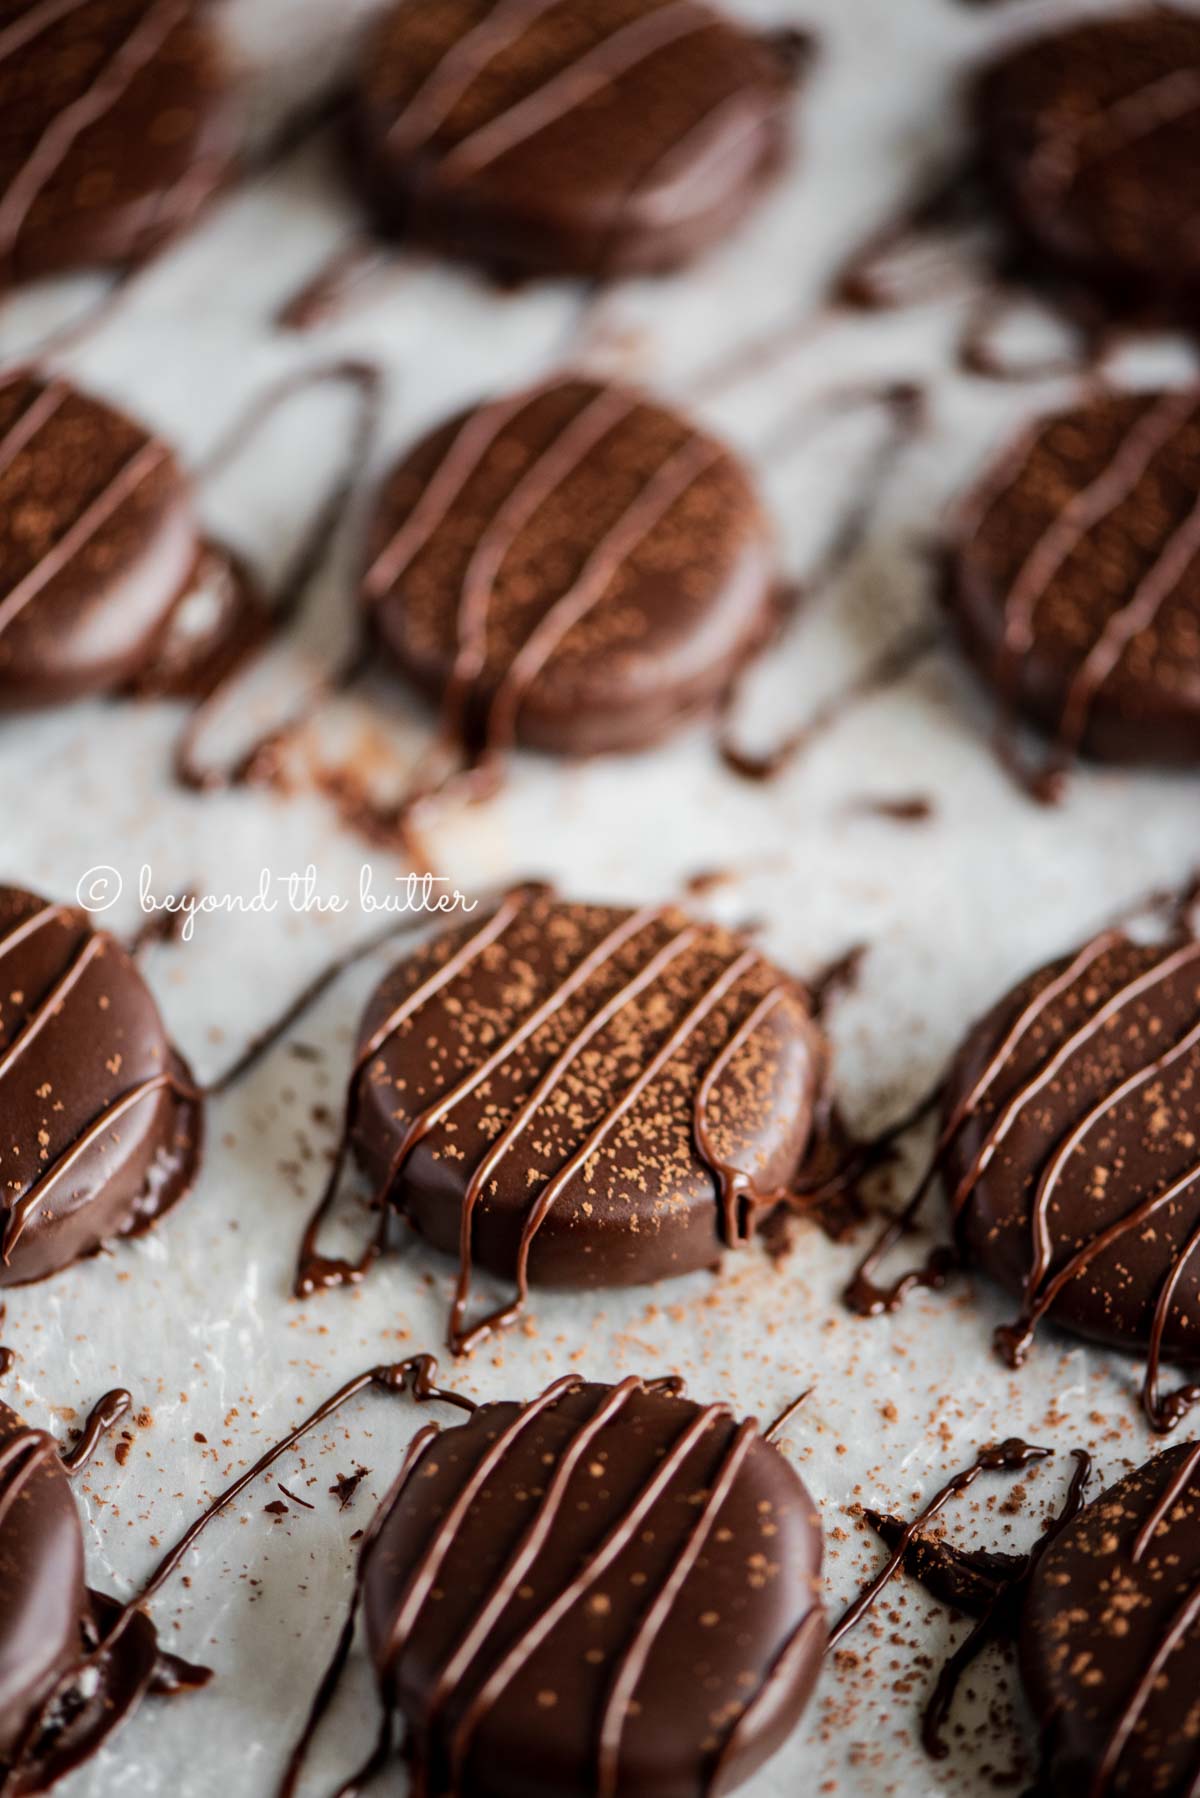 Homemade peppermint patties on a parchment lined baking sheet sprinkled with cocoa and drizzled with melted chocolate | All Images © Beyond the Butter®